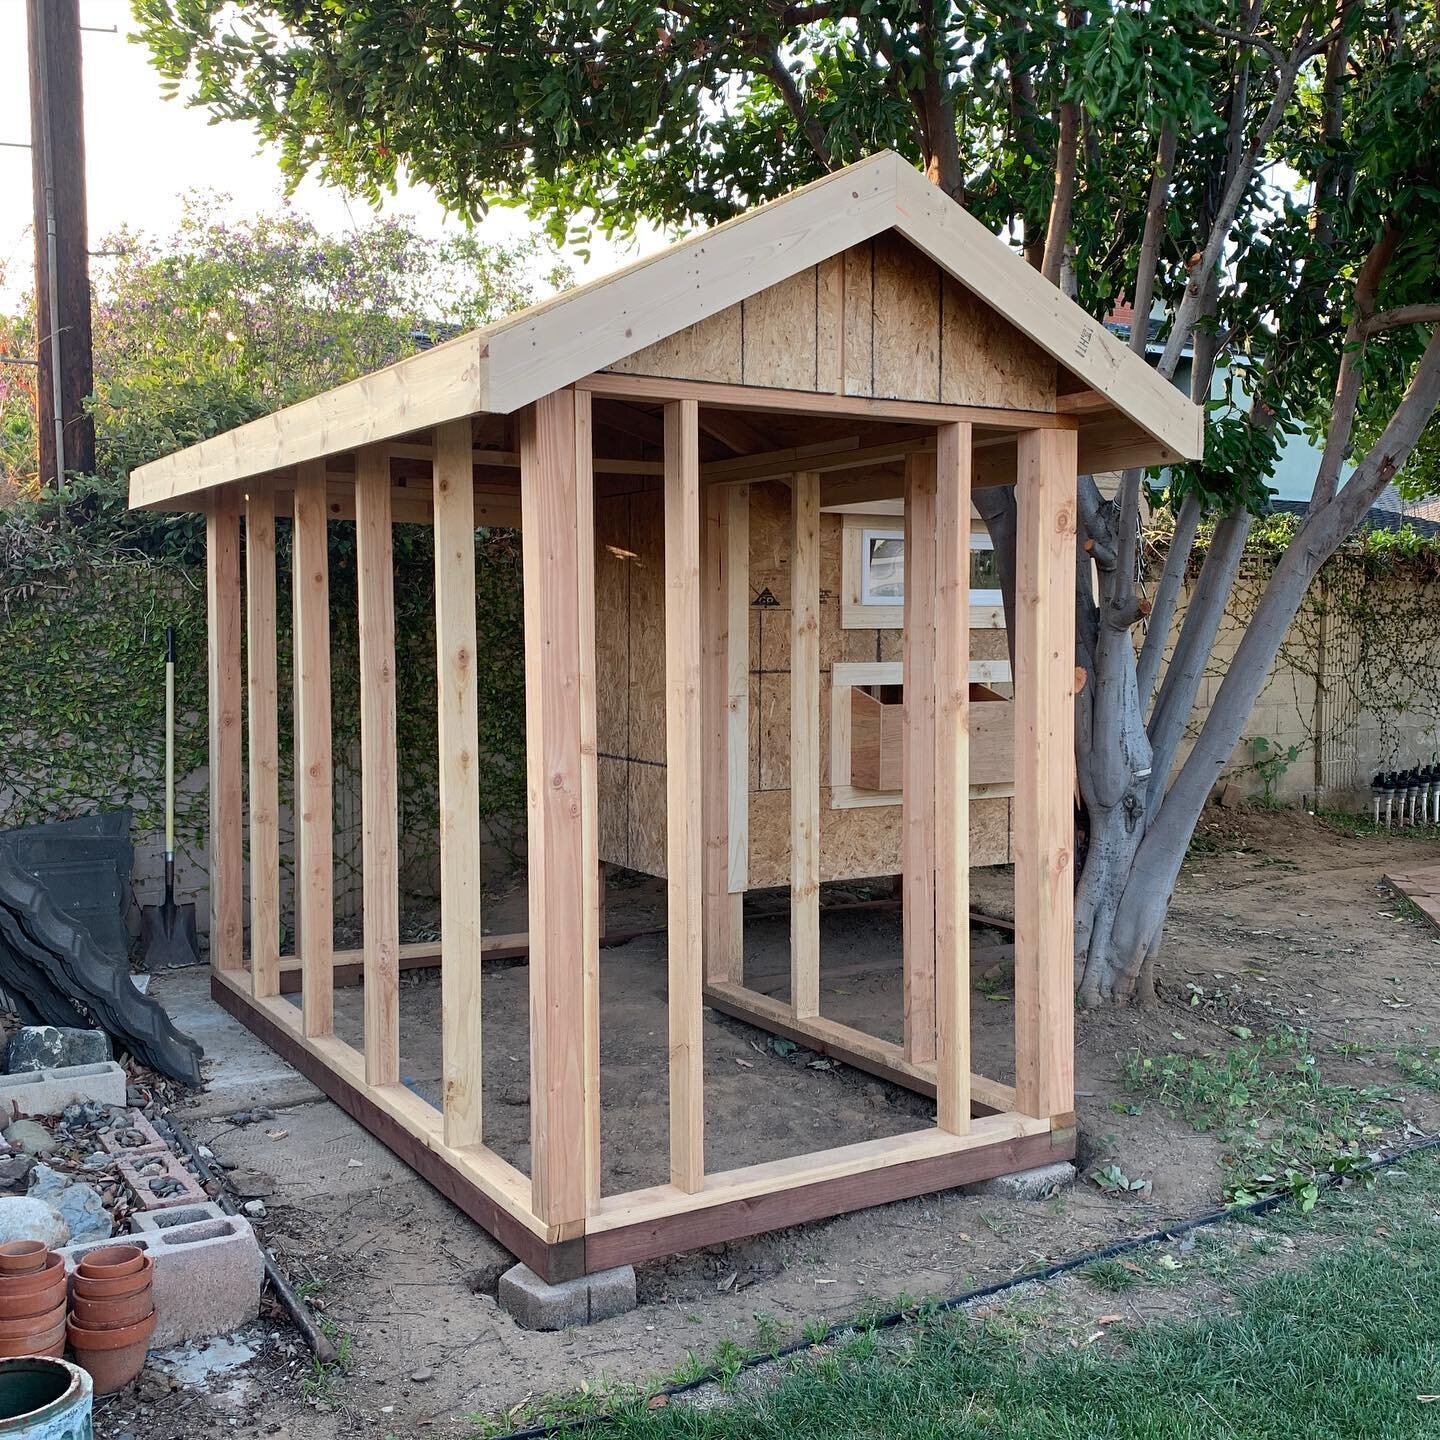 Cluckingham Palace day 7:

Made a ton of progress today! Added some more framing and installed 2 windows, finished sheeting the walls, added trim around all the edges and doorways, pulled down the siding from storage for tomorrow, picked up roofing m